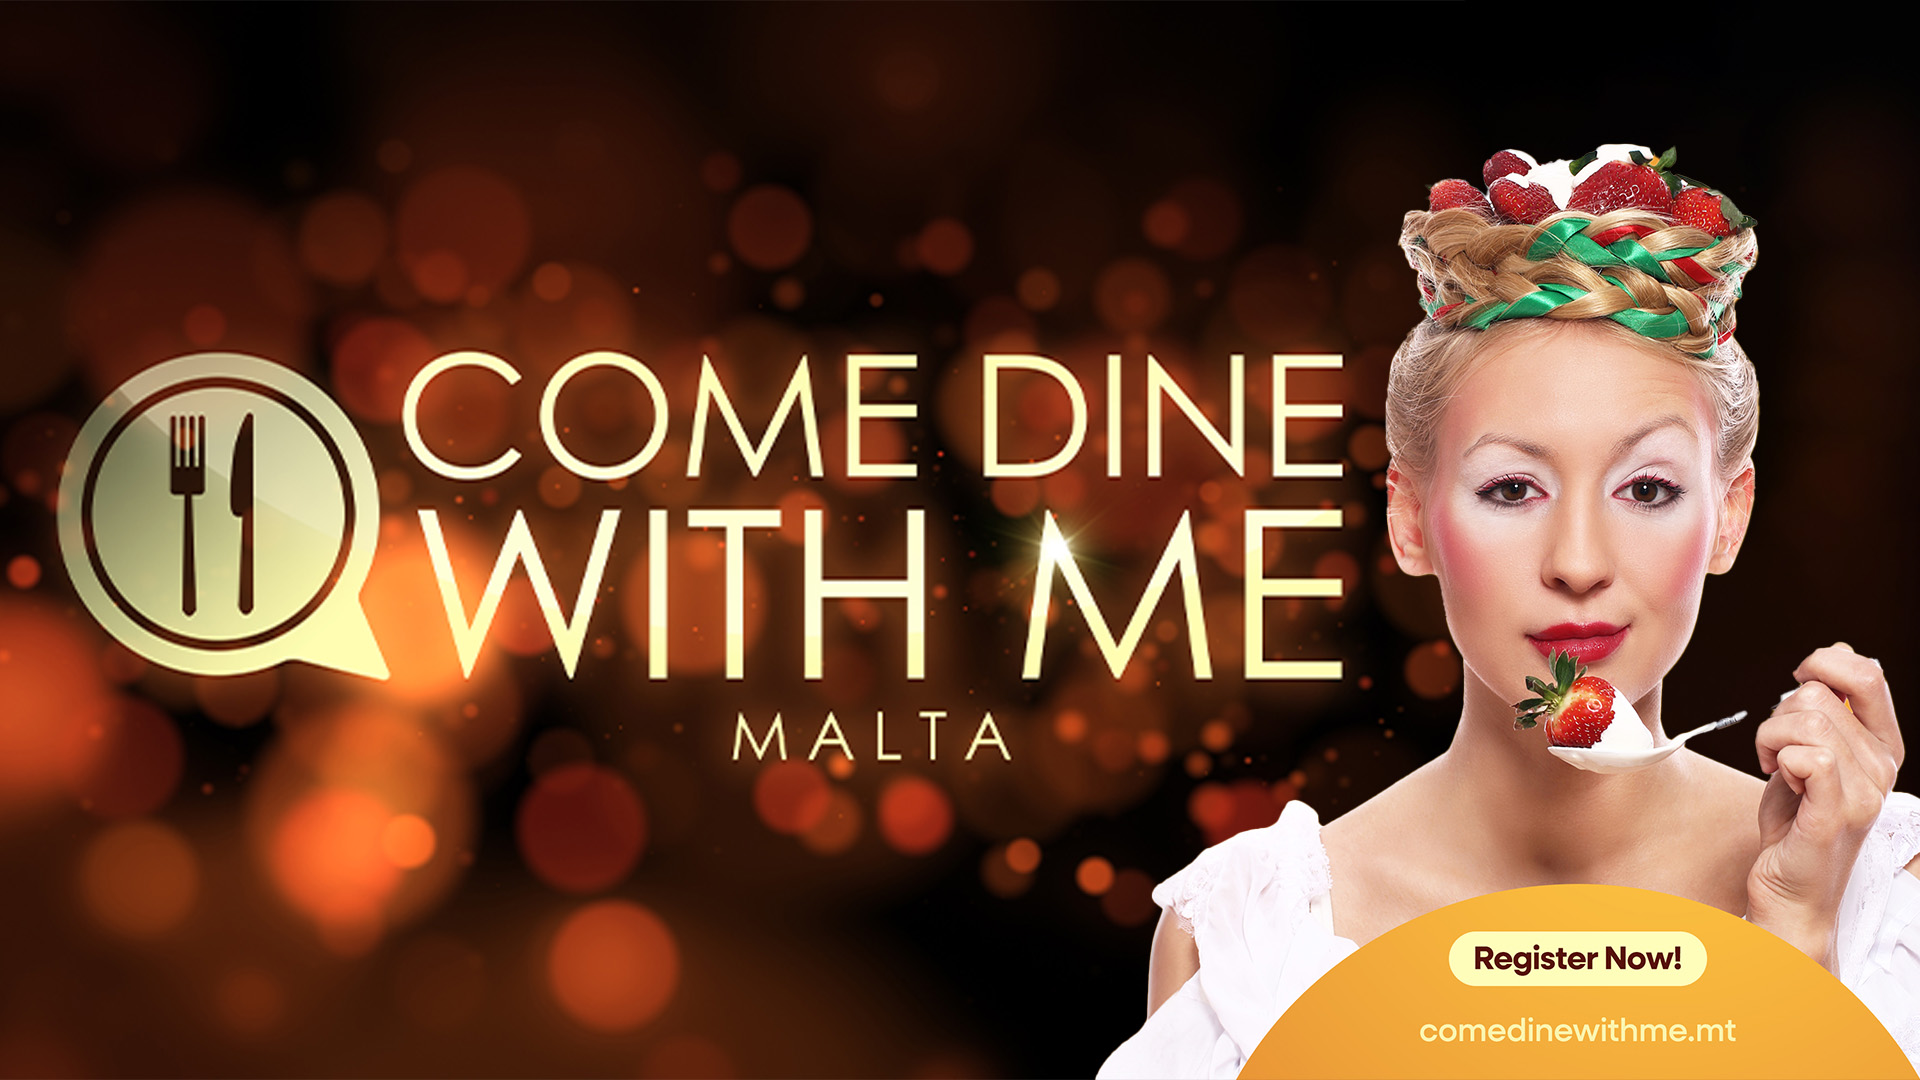 Hit Show Come Dine With Me Is Coming To Malta's TVs!